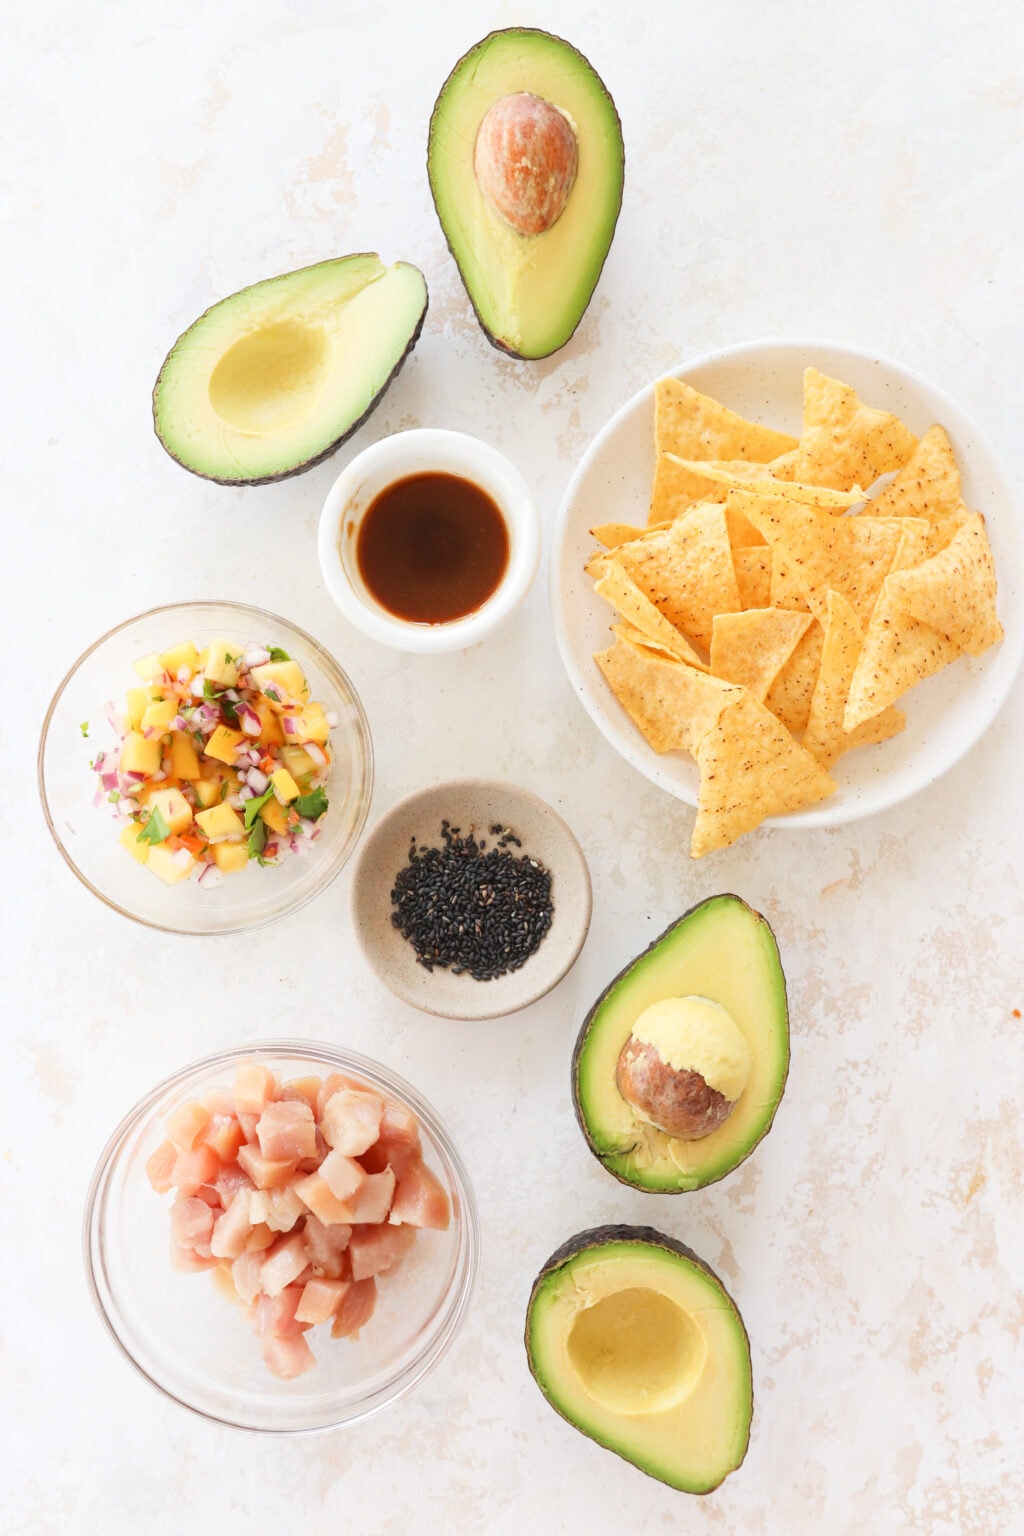 An overhead shot of ingredients for tuna avocado boats. There is an avocado cut in half, a small bowl with soy sauce, a plate of tortilla chips, a clear bowl with mango habanero salsa, a brown bowl with black sesame seeds, a clear bowl with tuna and another avocado cut into half.